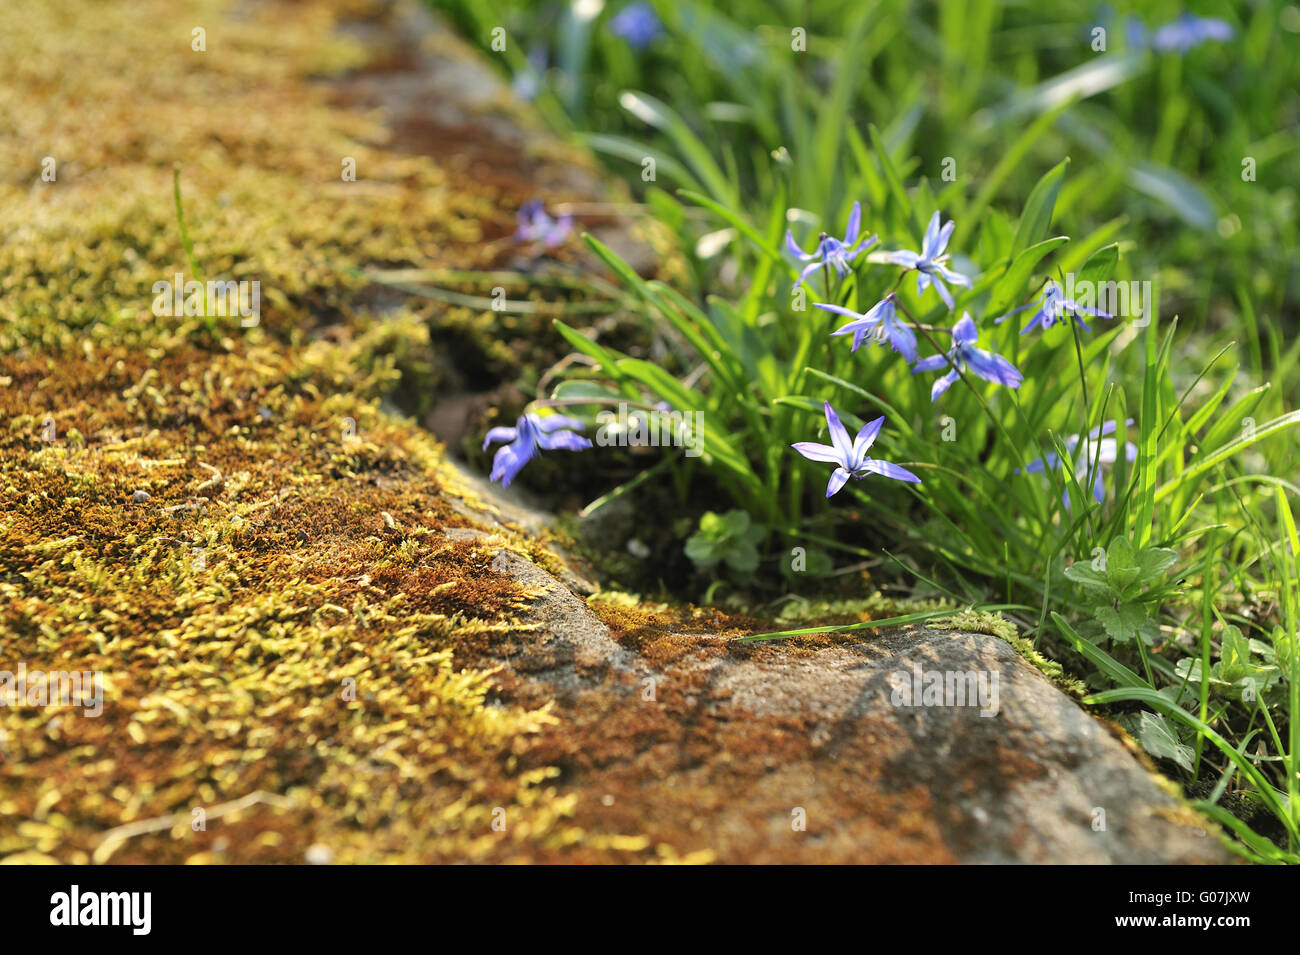 Scilla sibirica flowers in spring meadow Stock Photo